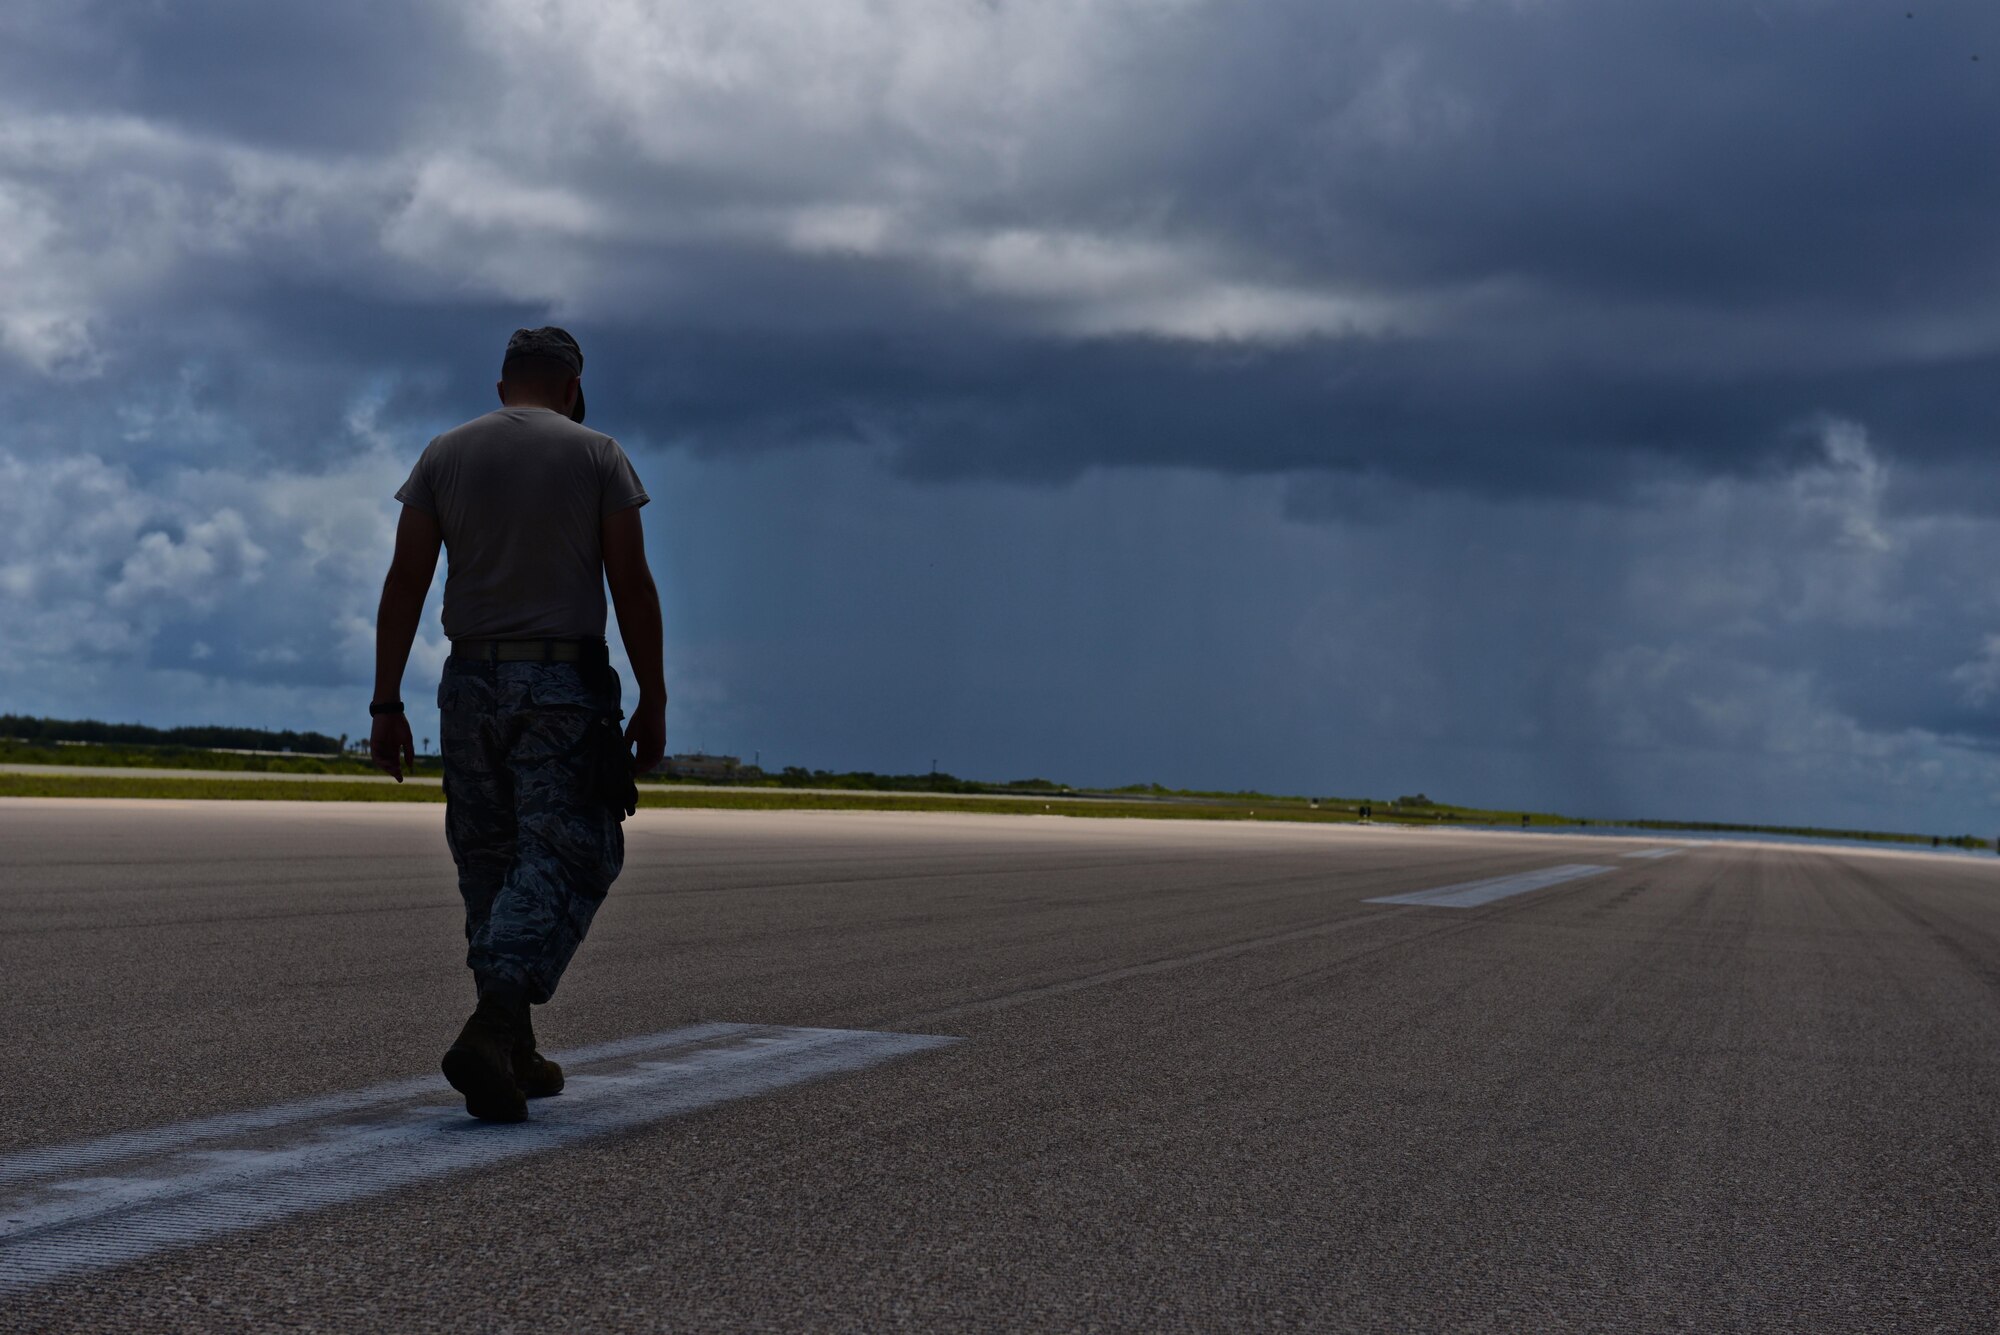 U.S. Air Force Capt. Clark Morgan, 36th Mobility Response Squadron contingency engineer, surveys the pavement on Wake Airfield for cracks and other damage July 20, 2015, Wake Island. A team with the 36th CRG at Andersen Air Force Base, Guam, deployed to the atoll to assist in airfield storm recovery efforts, and surveyed the runway to ensure adequate flightline safety. (U.S. Air Force photo by Senior Airman Alexander W. Riedel/Released)
